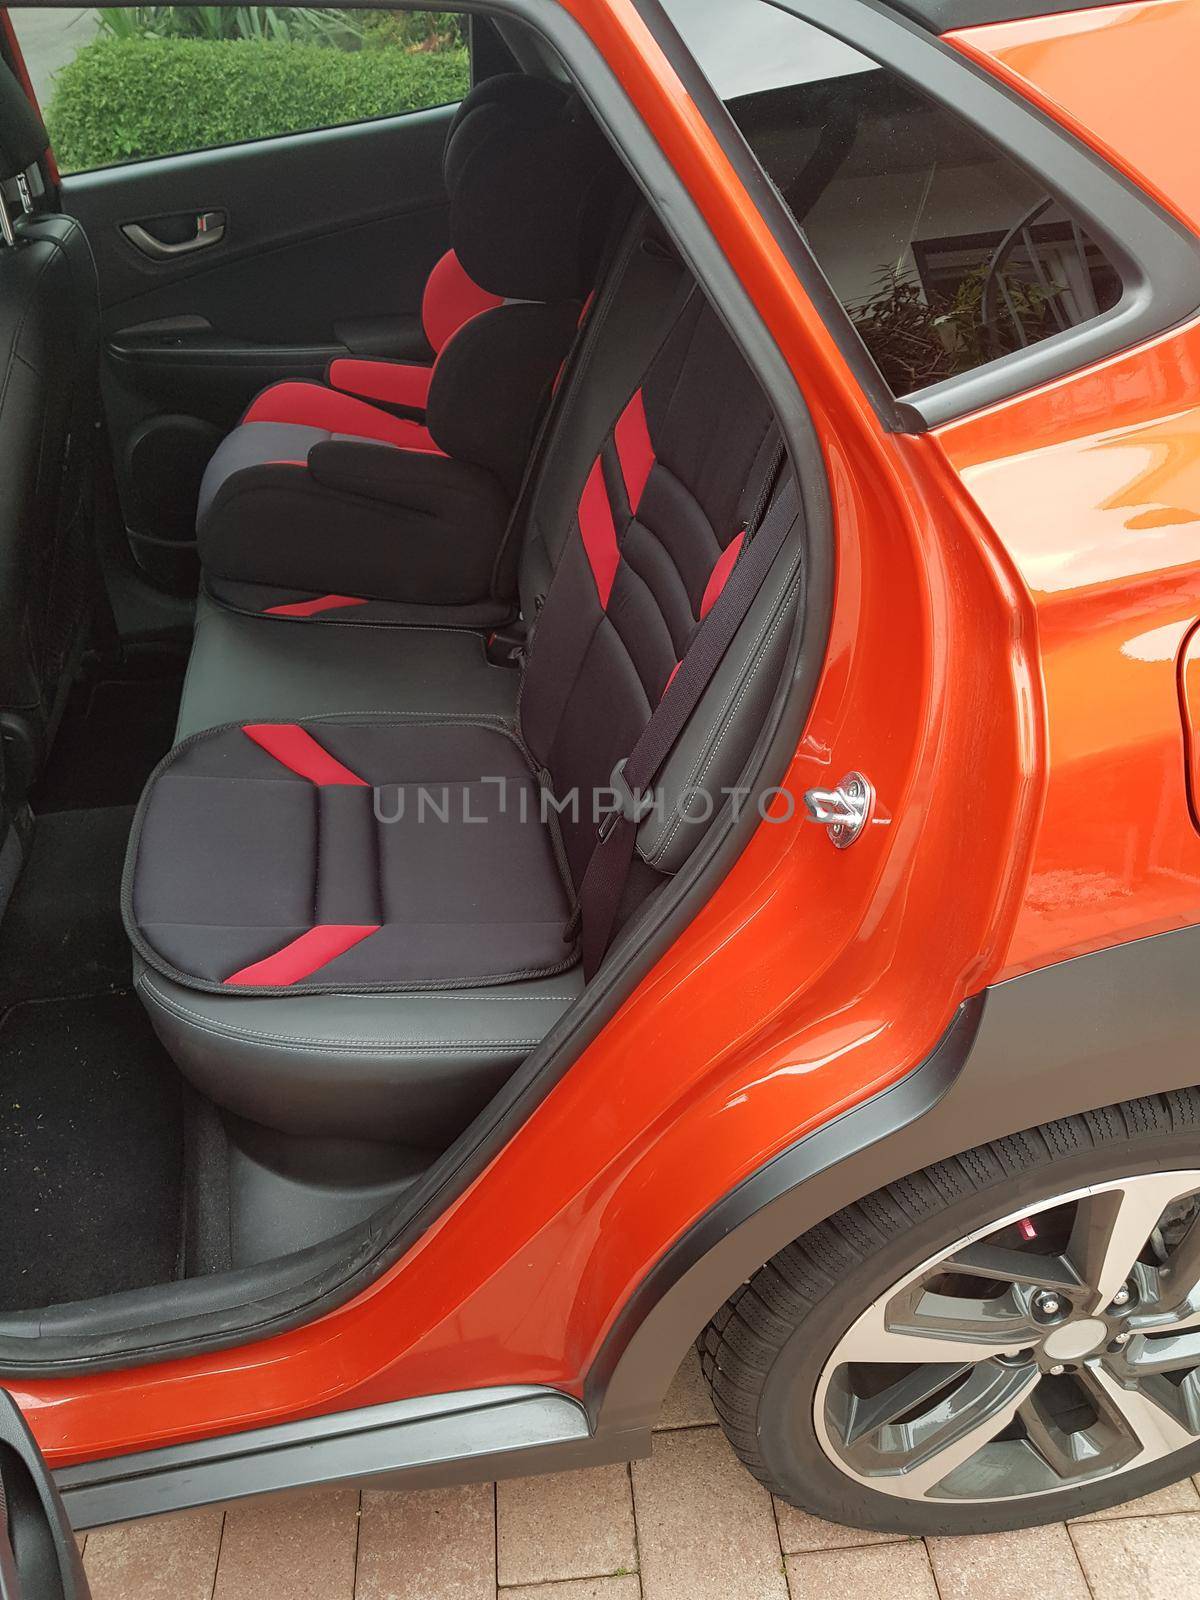 Close up, car interior. Passenger seats in modern luxury SUV car with leather seats and child seat.